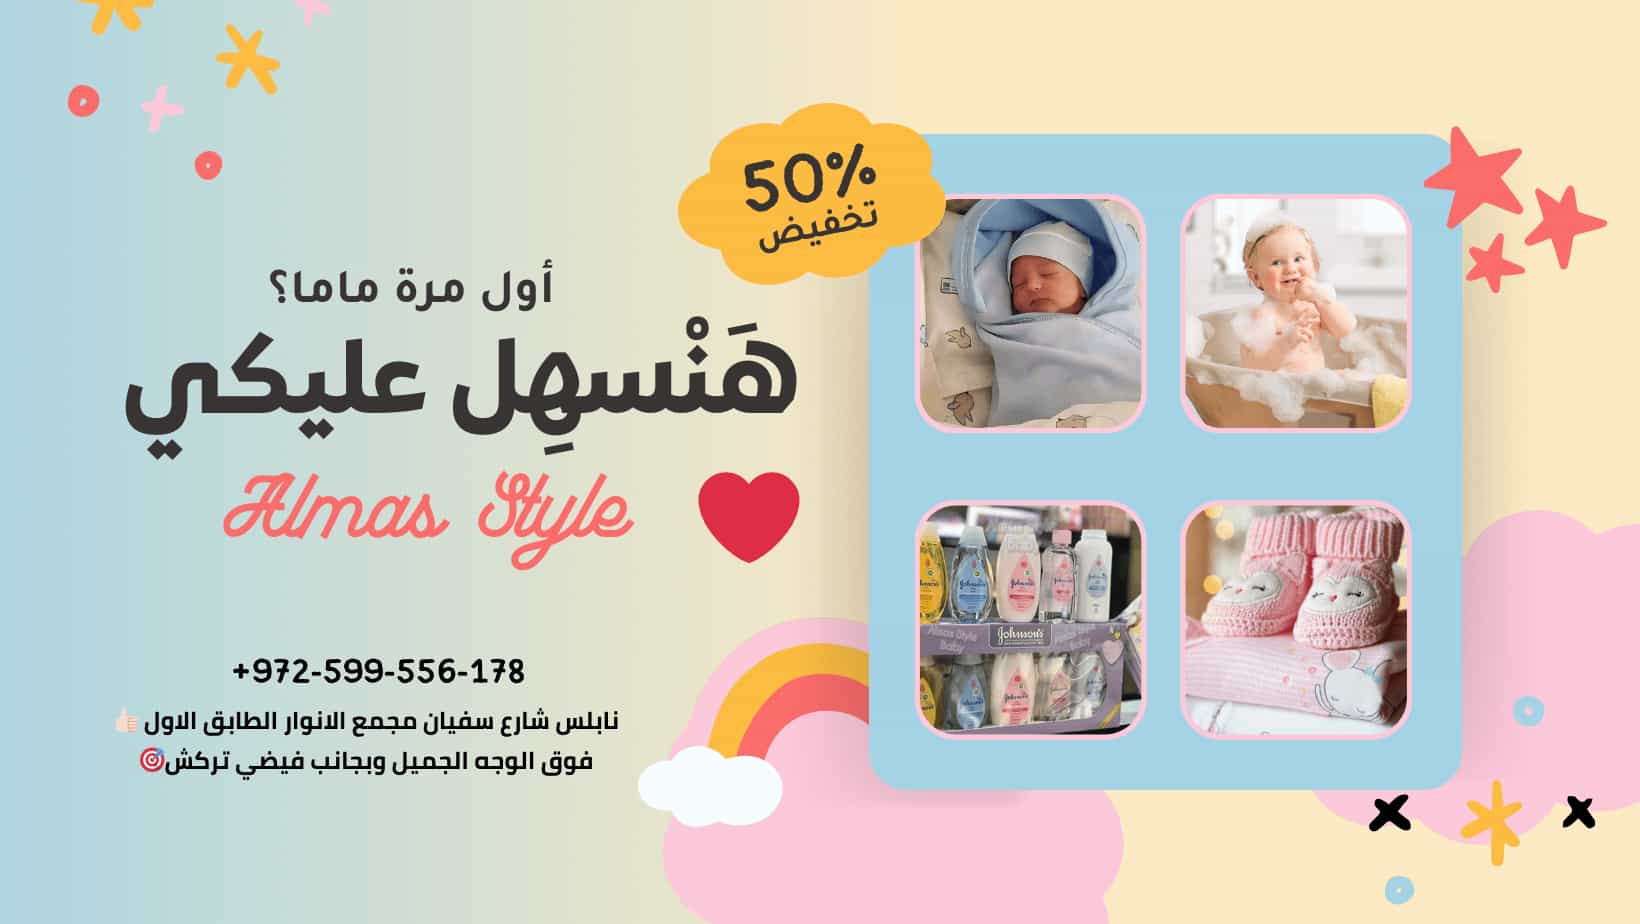 Yellow Illustrative Collage Baby Shop Banner (1640 x 924 px) (1)